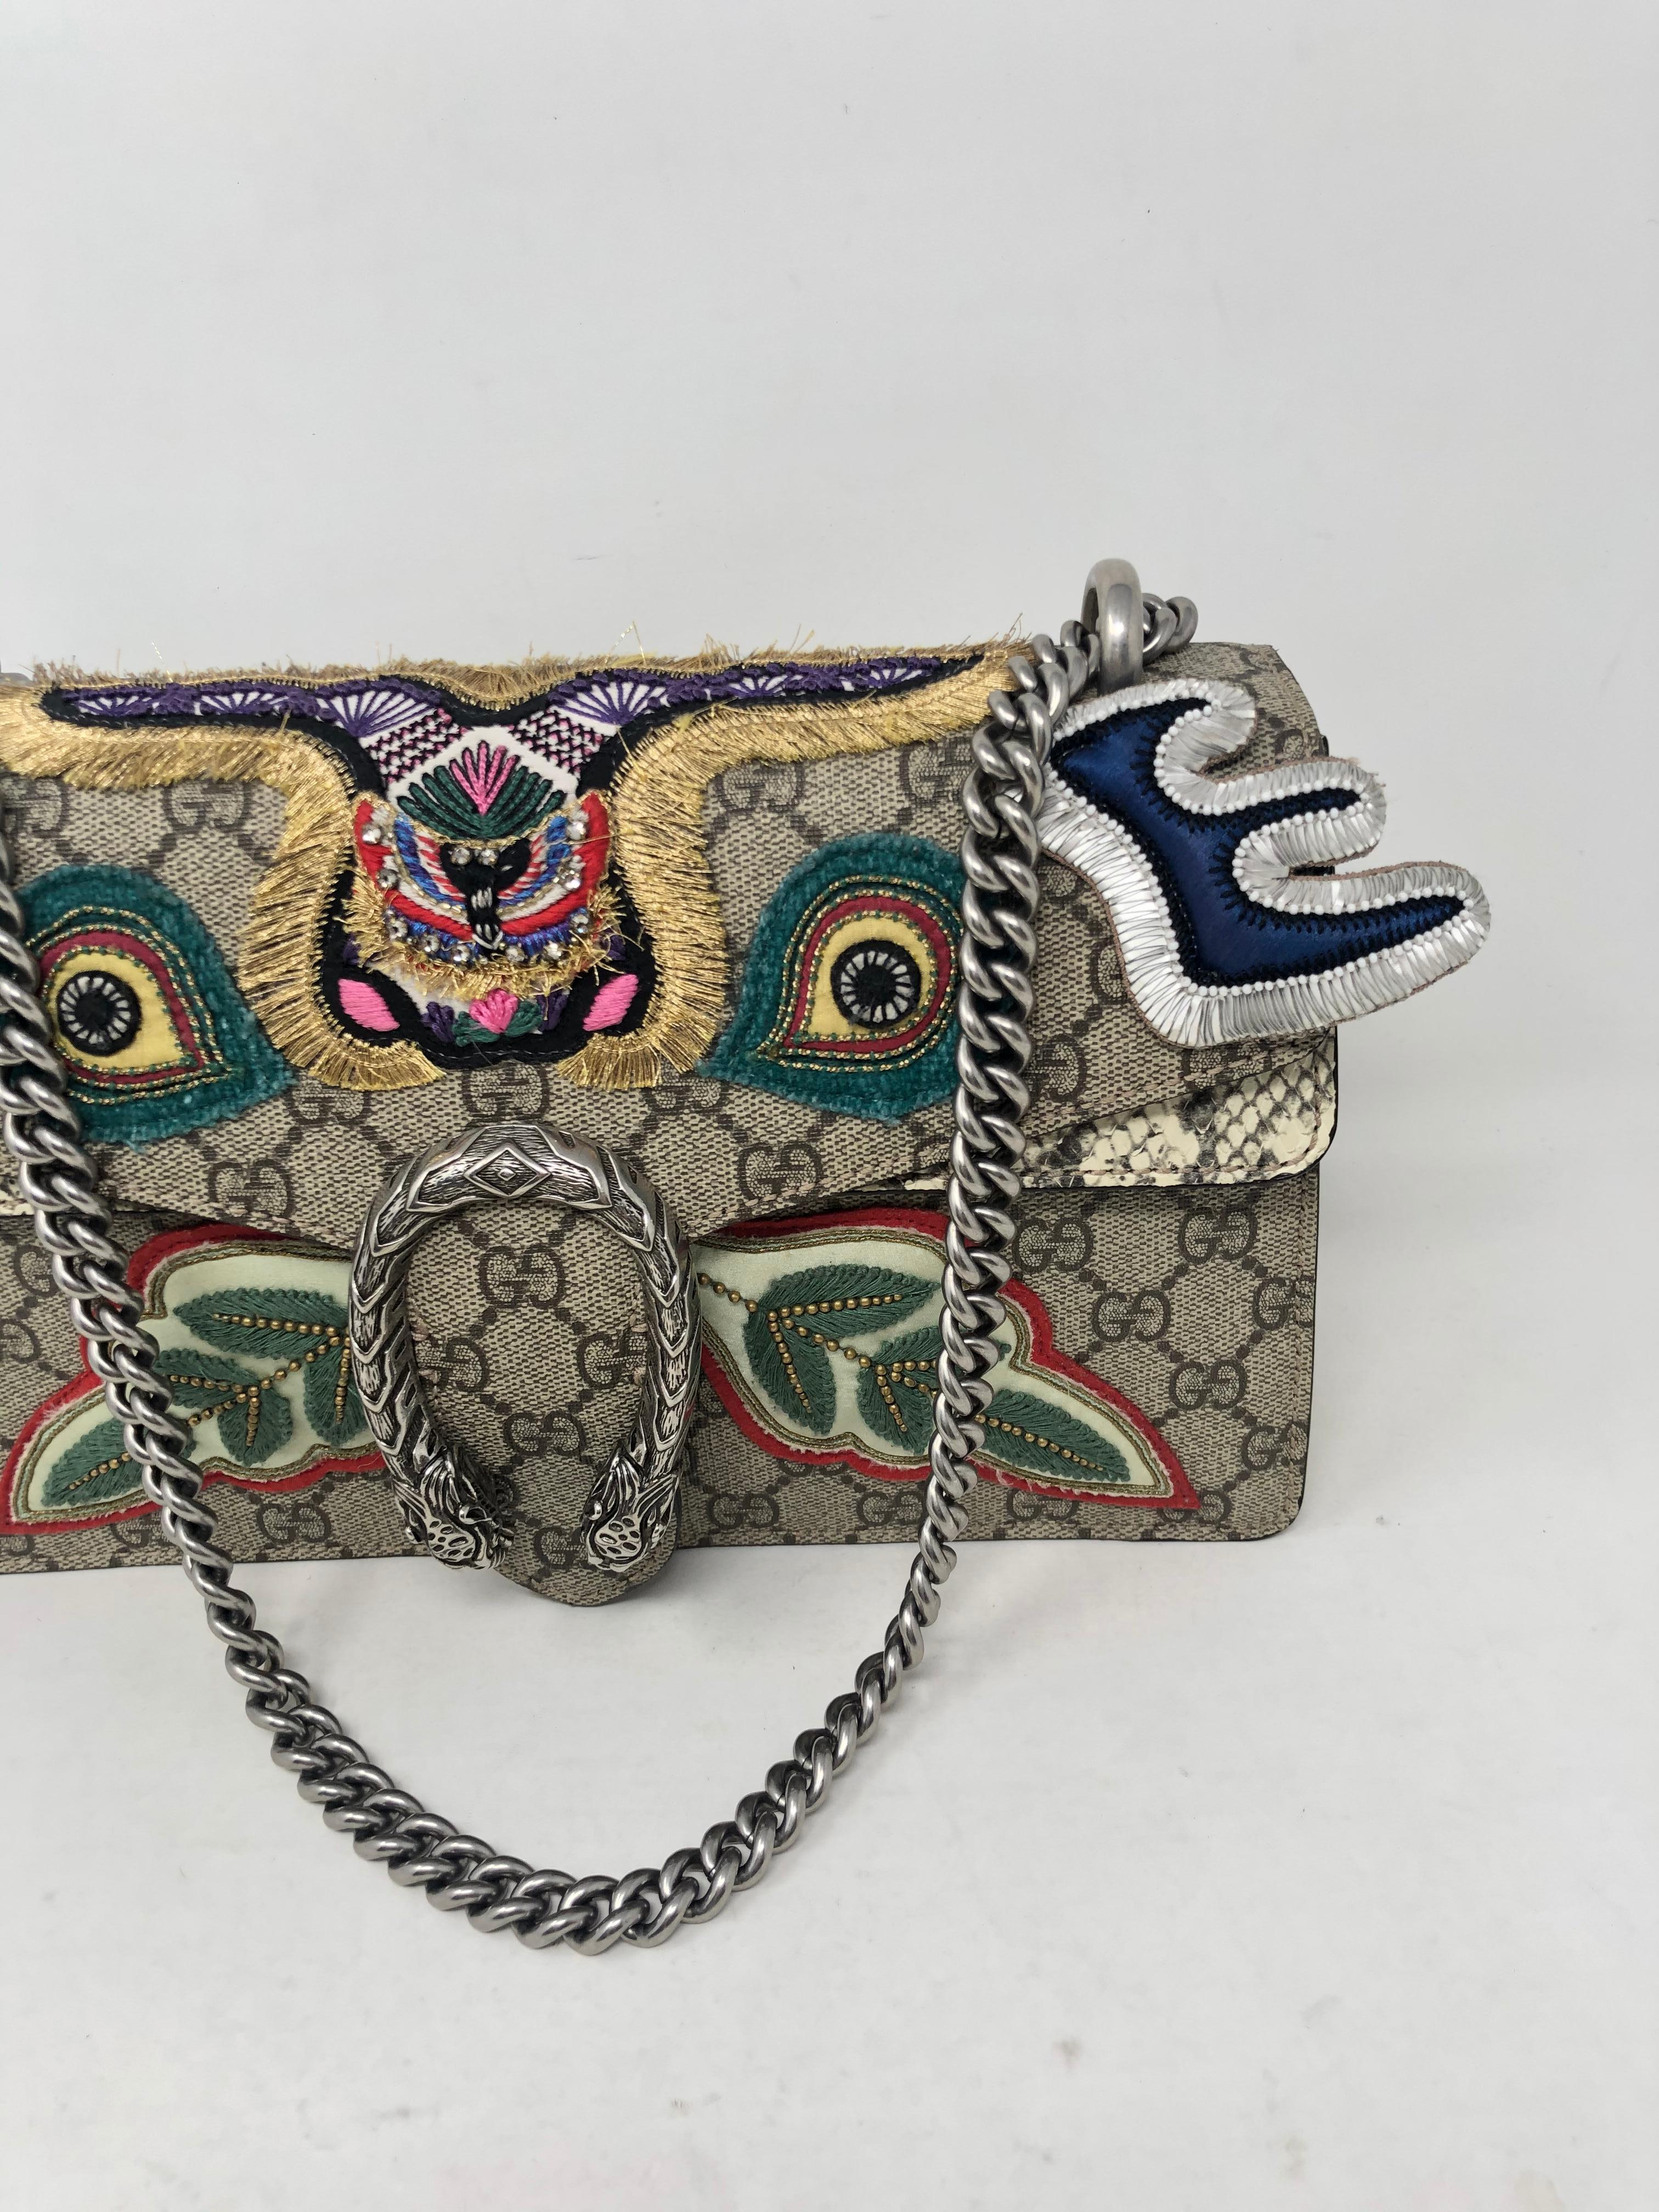 Gucci Python Dionysus Bag Limited Edition. Large size monogram with python leather sides. Unique embroidered pattern on bag. Beautiful bag. Rare and limited. Guaranteed authentic. 